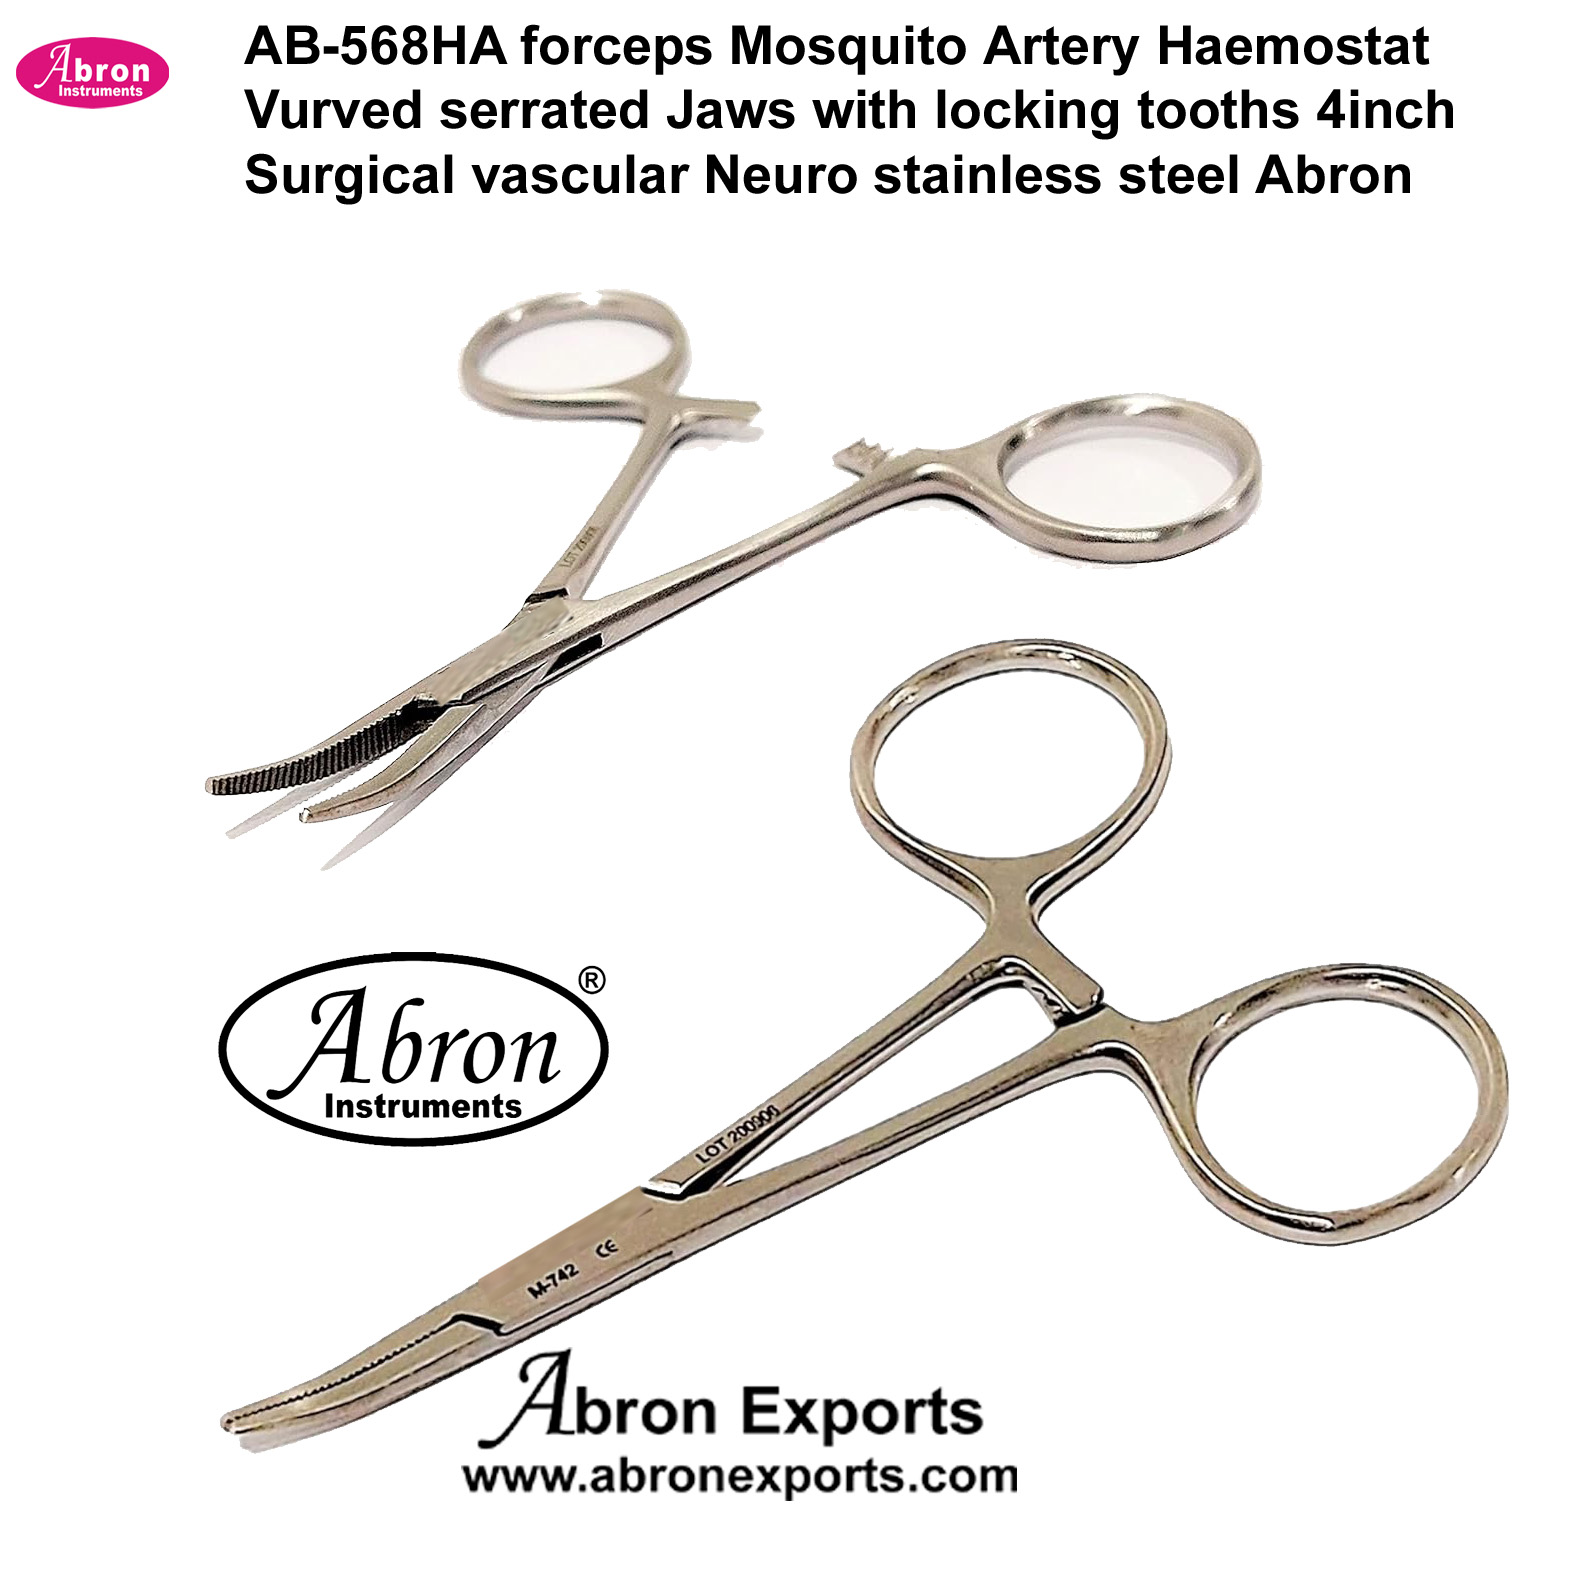 Surgical forceps Mosquito Artery Haemostat  Curved serrated Jaws with locking tooths 4inch vascular Neuro stainless steel 10pc Abron AB-568HA 